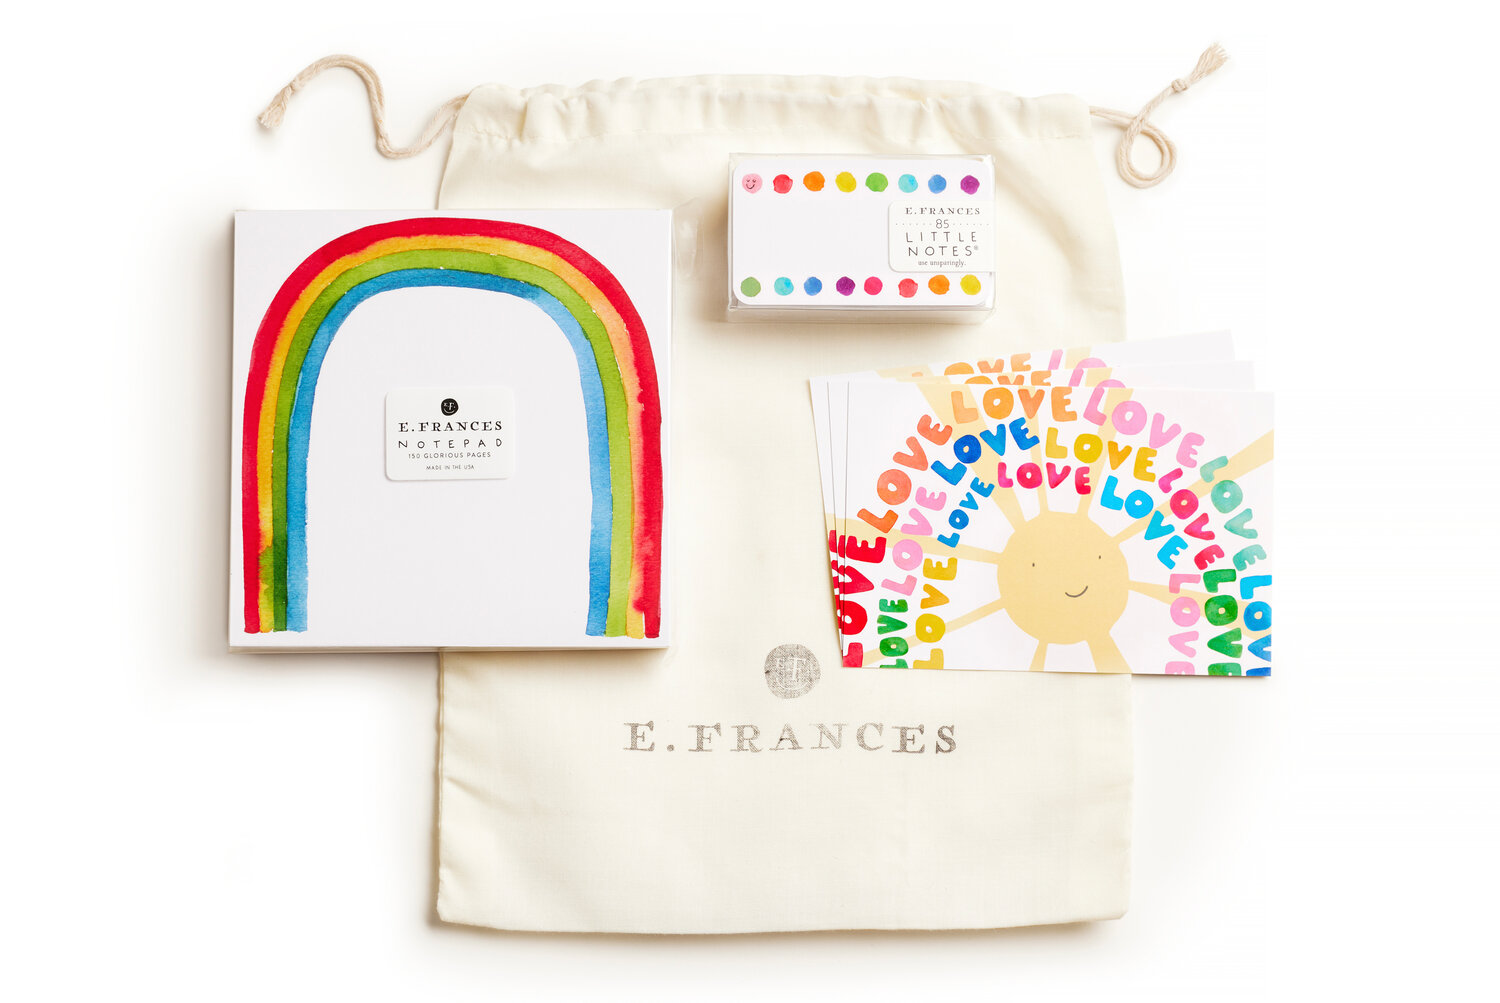 A muslin bag holds the Cheerful gift set